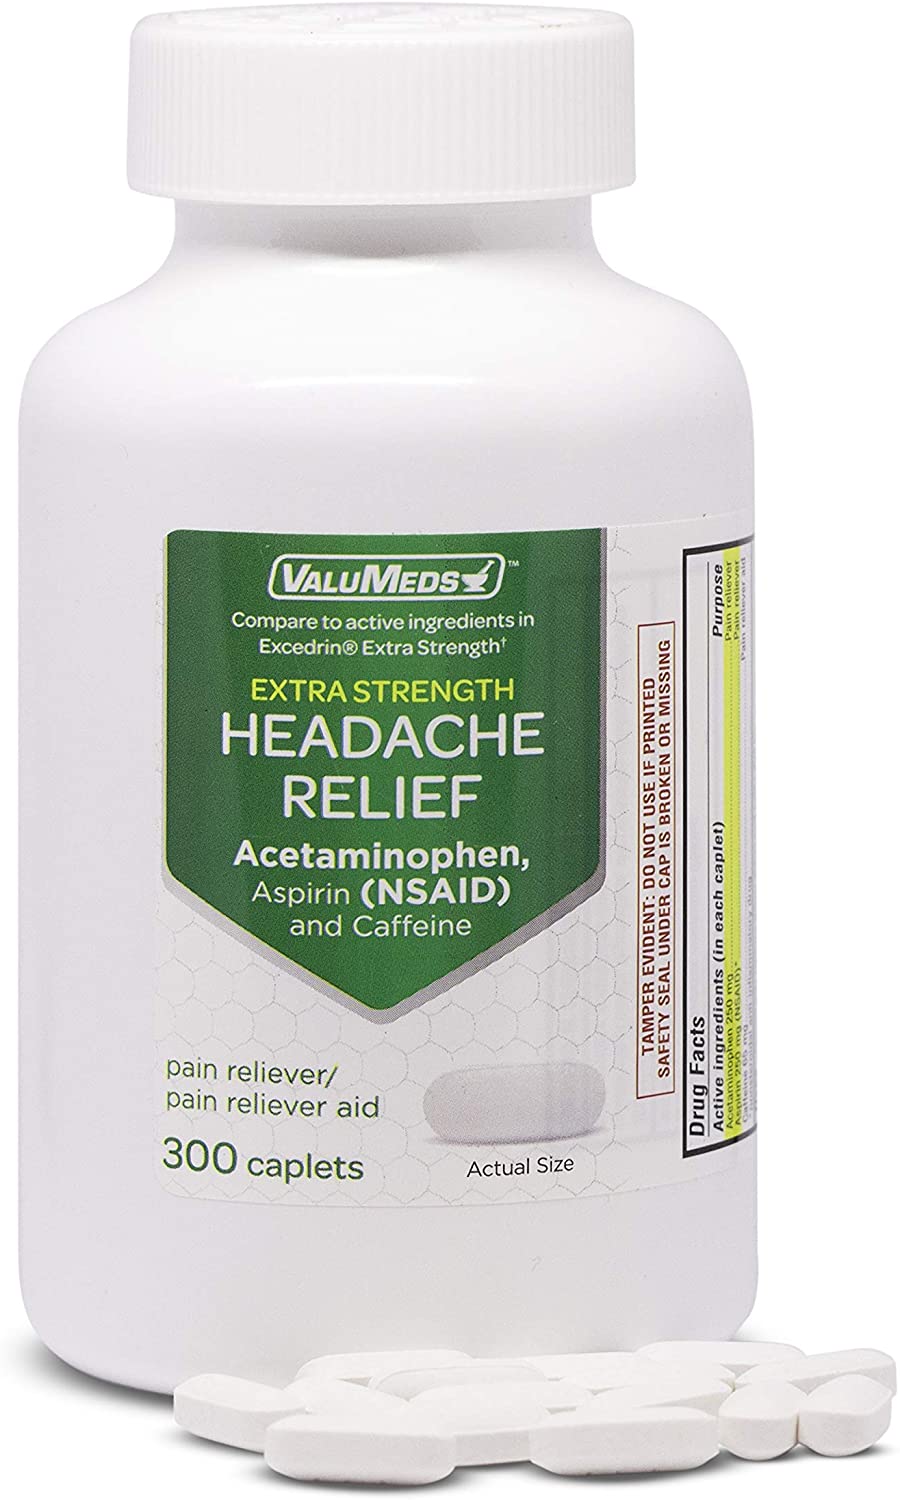 ValuMeds Extra Strength Headache Relief Caplets (300-Count) | Nonsteroidal Anti-Inflammatory Pain Reliever | Arthritis, Muscles, Joints